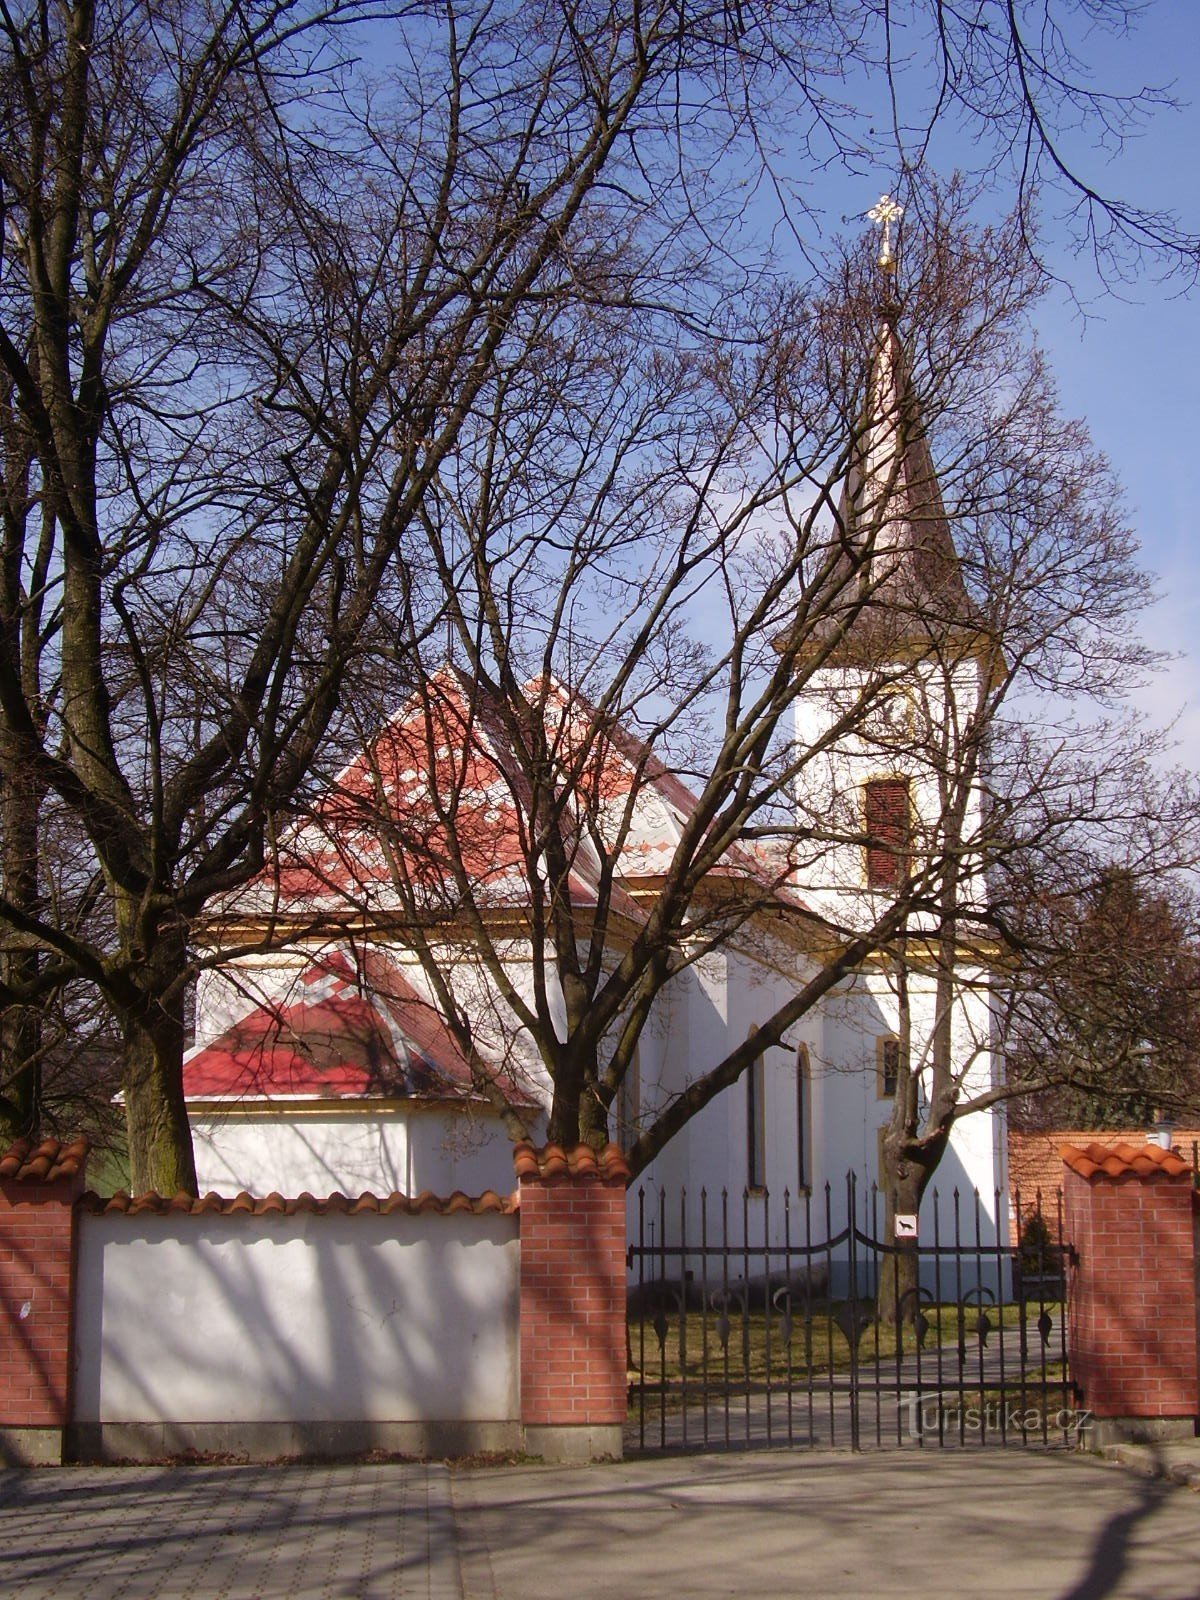 Kirche St. Cecilie in Lipůvka